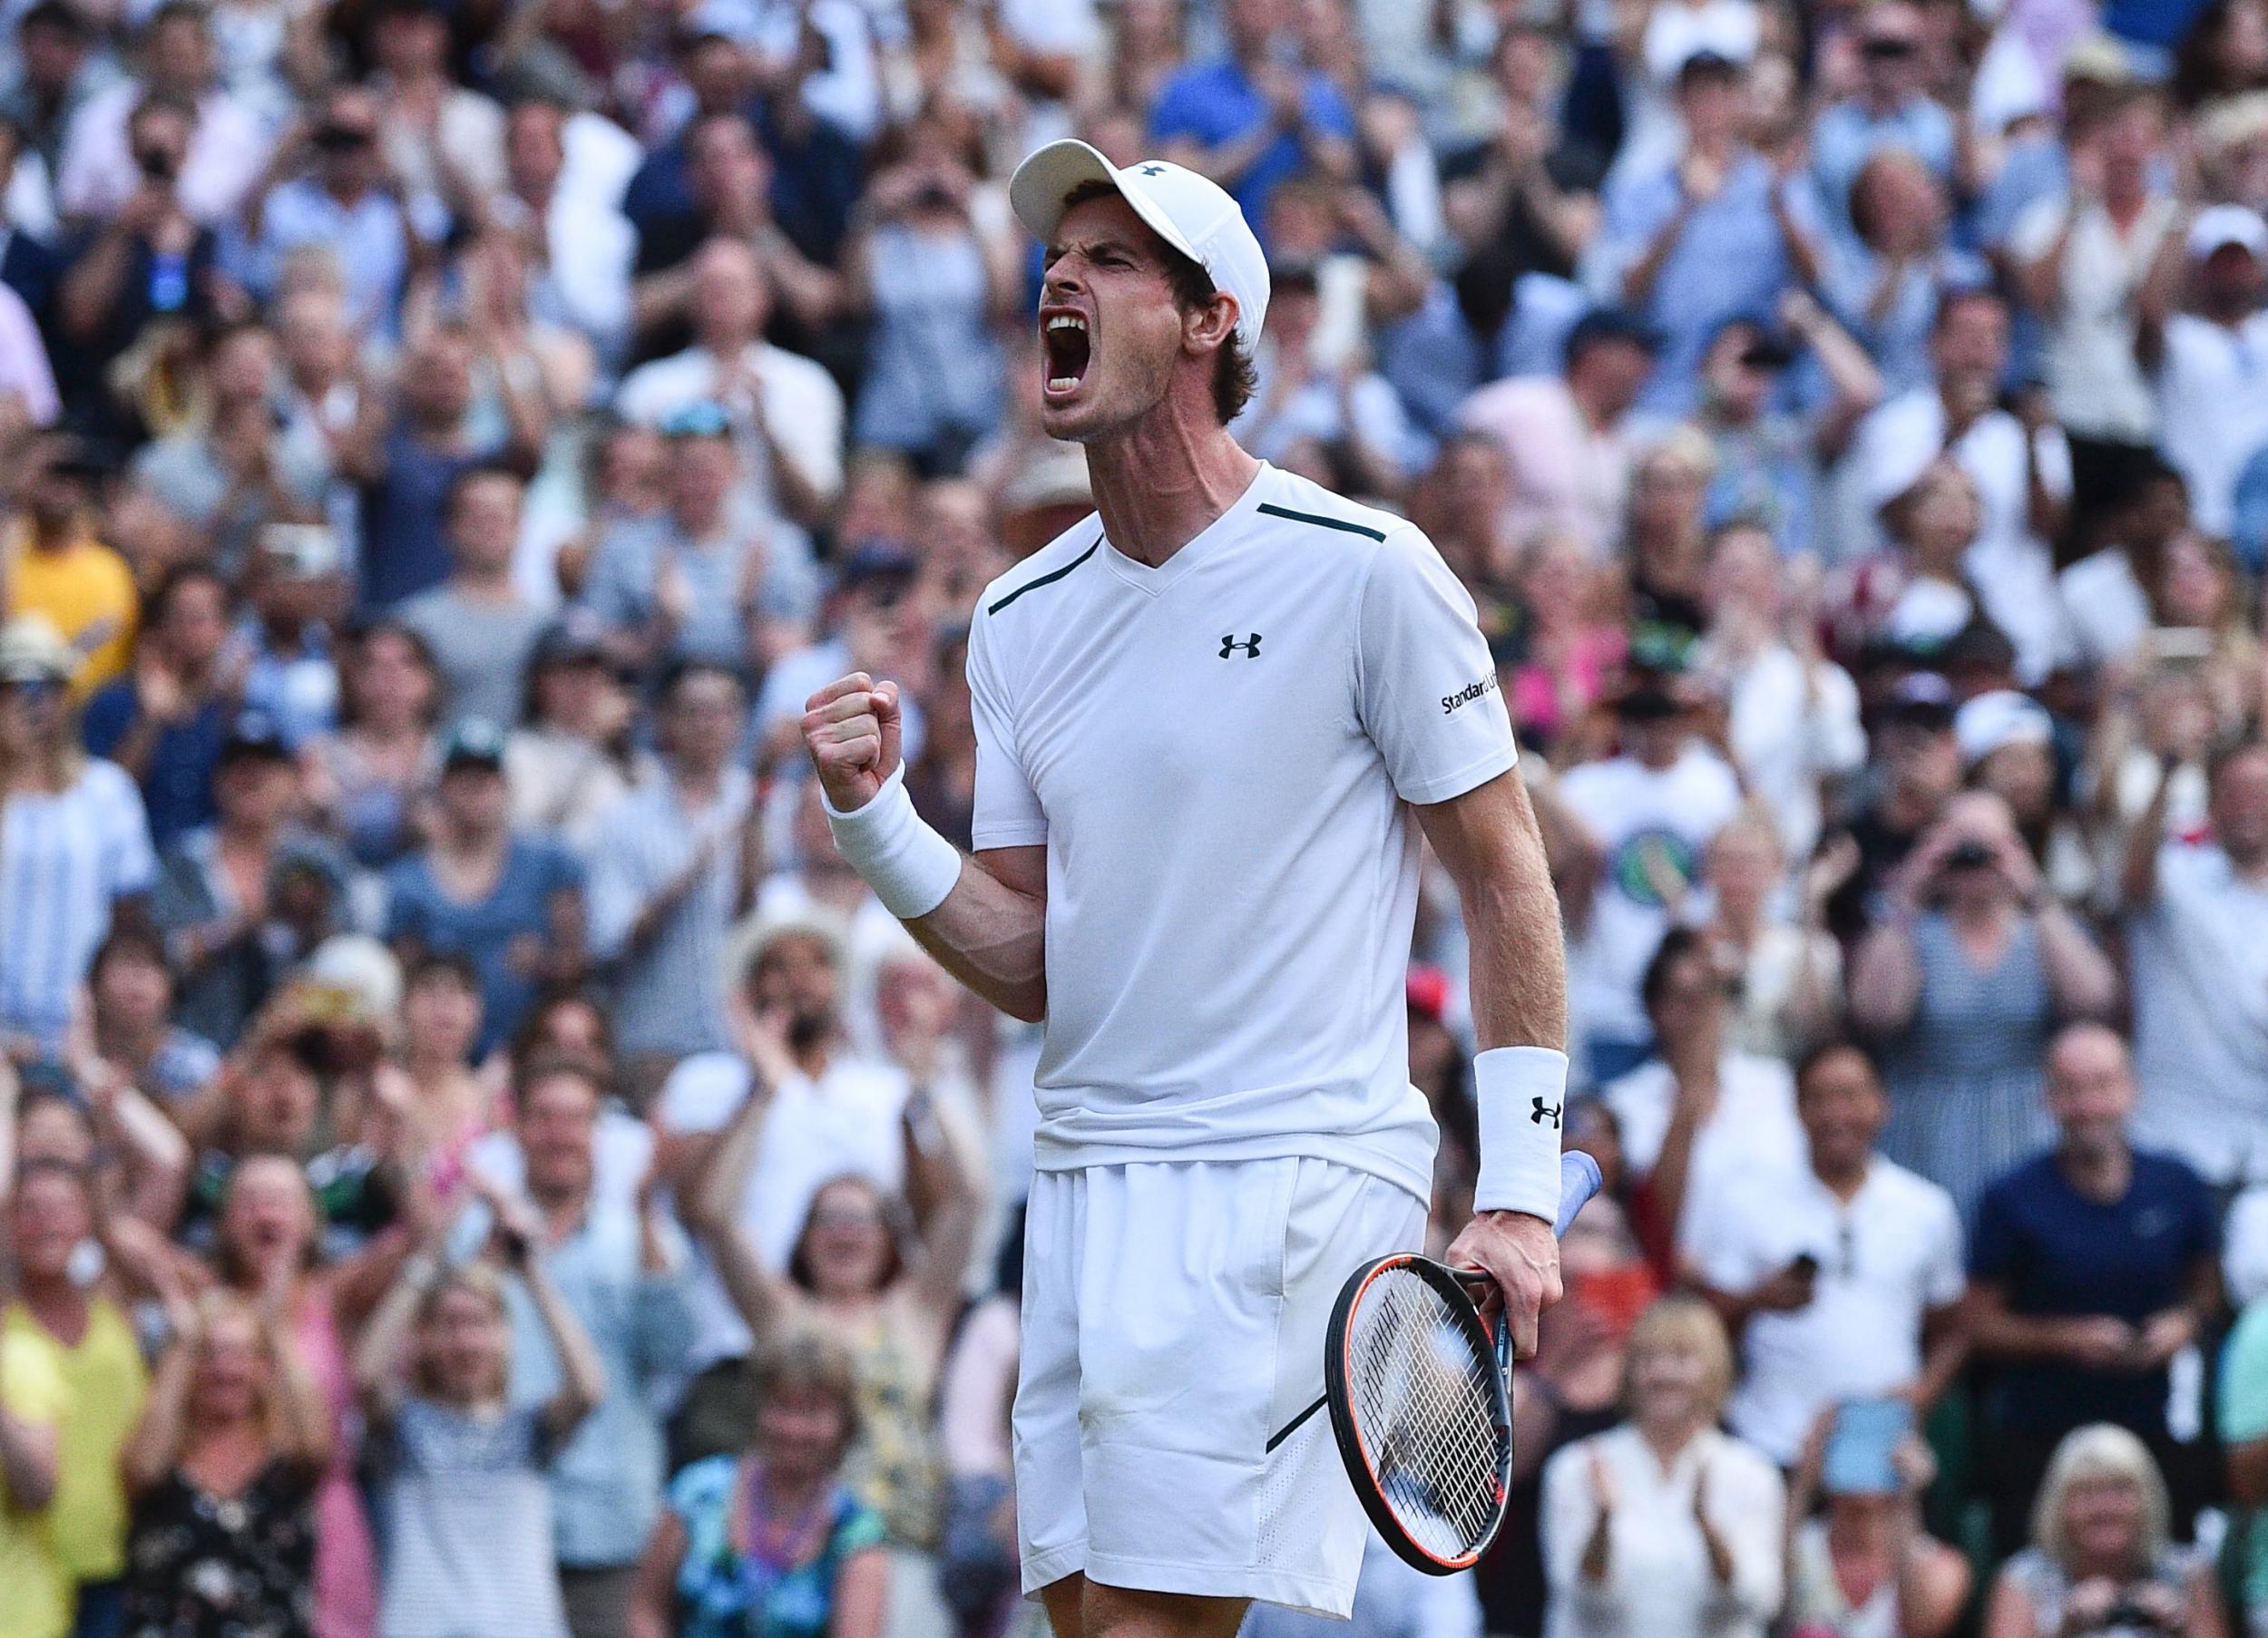 Andy Murray vs Benoit Paire, Wimbledon fourth round live Follow updates from the World No 1s match on Centre Court The Independent The Independent